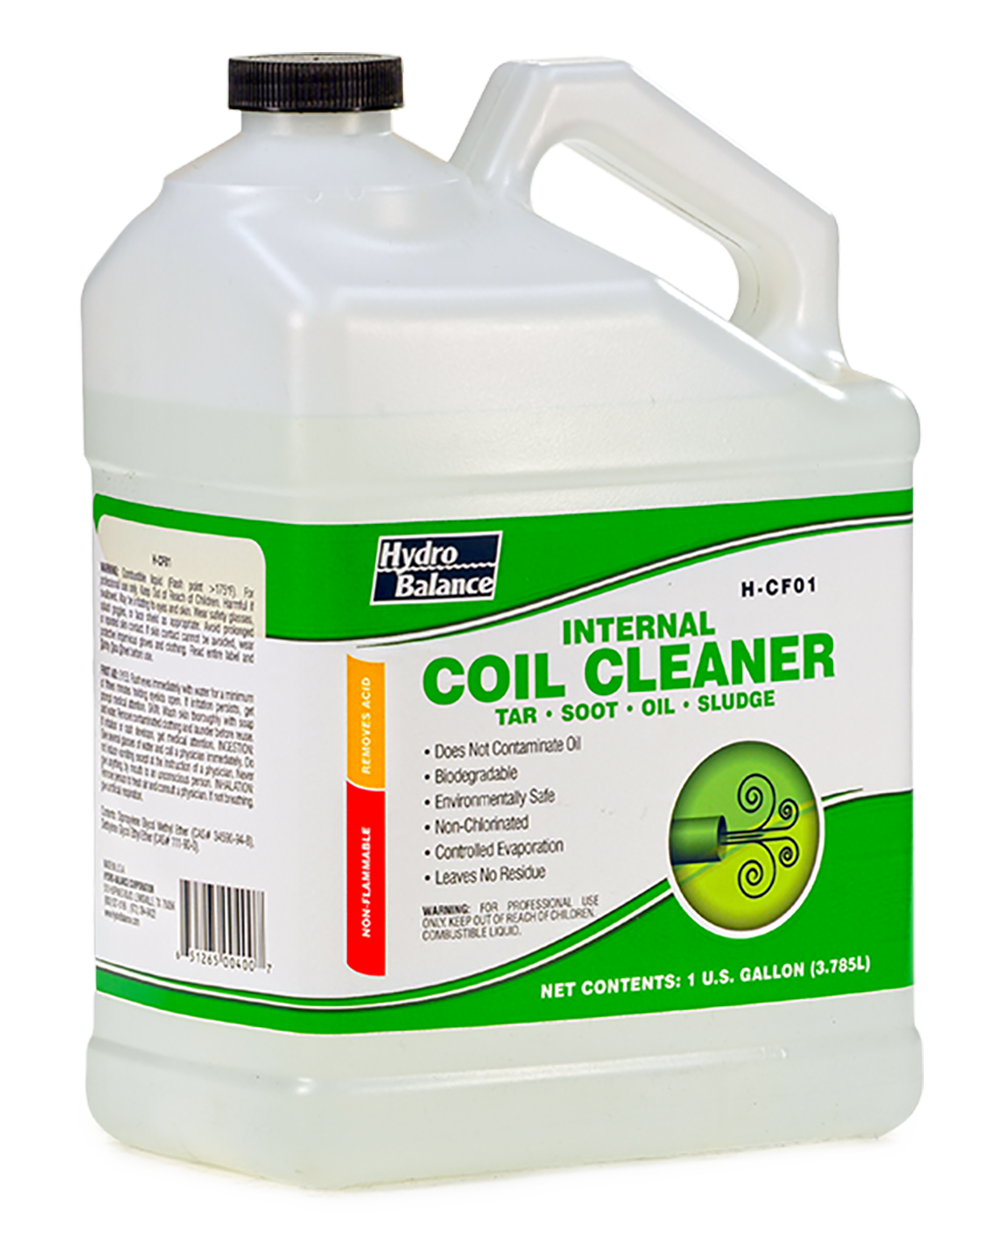 INTERNAL COIL CLEANER